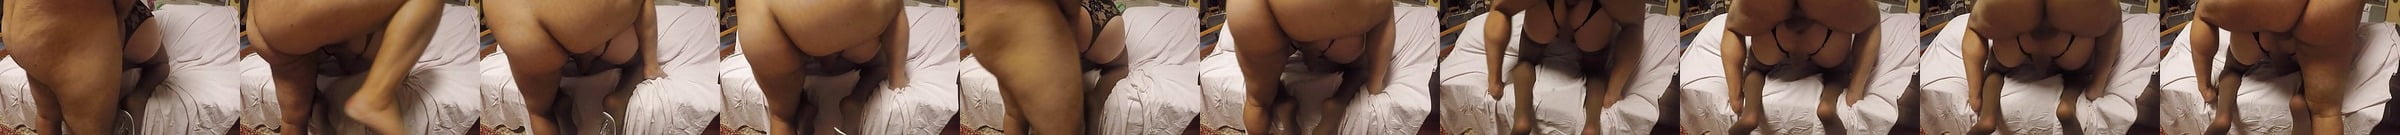 Moroccan Shemale Porn Videos With Trannies From Morocco Xhamster